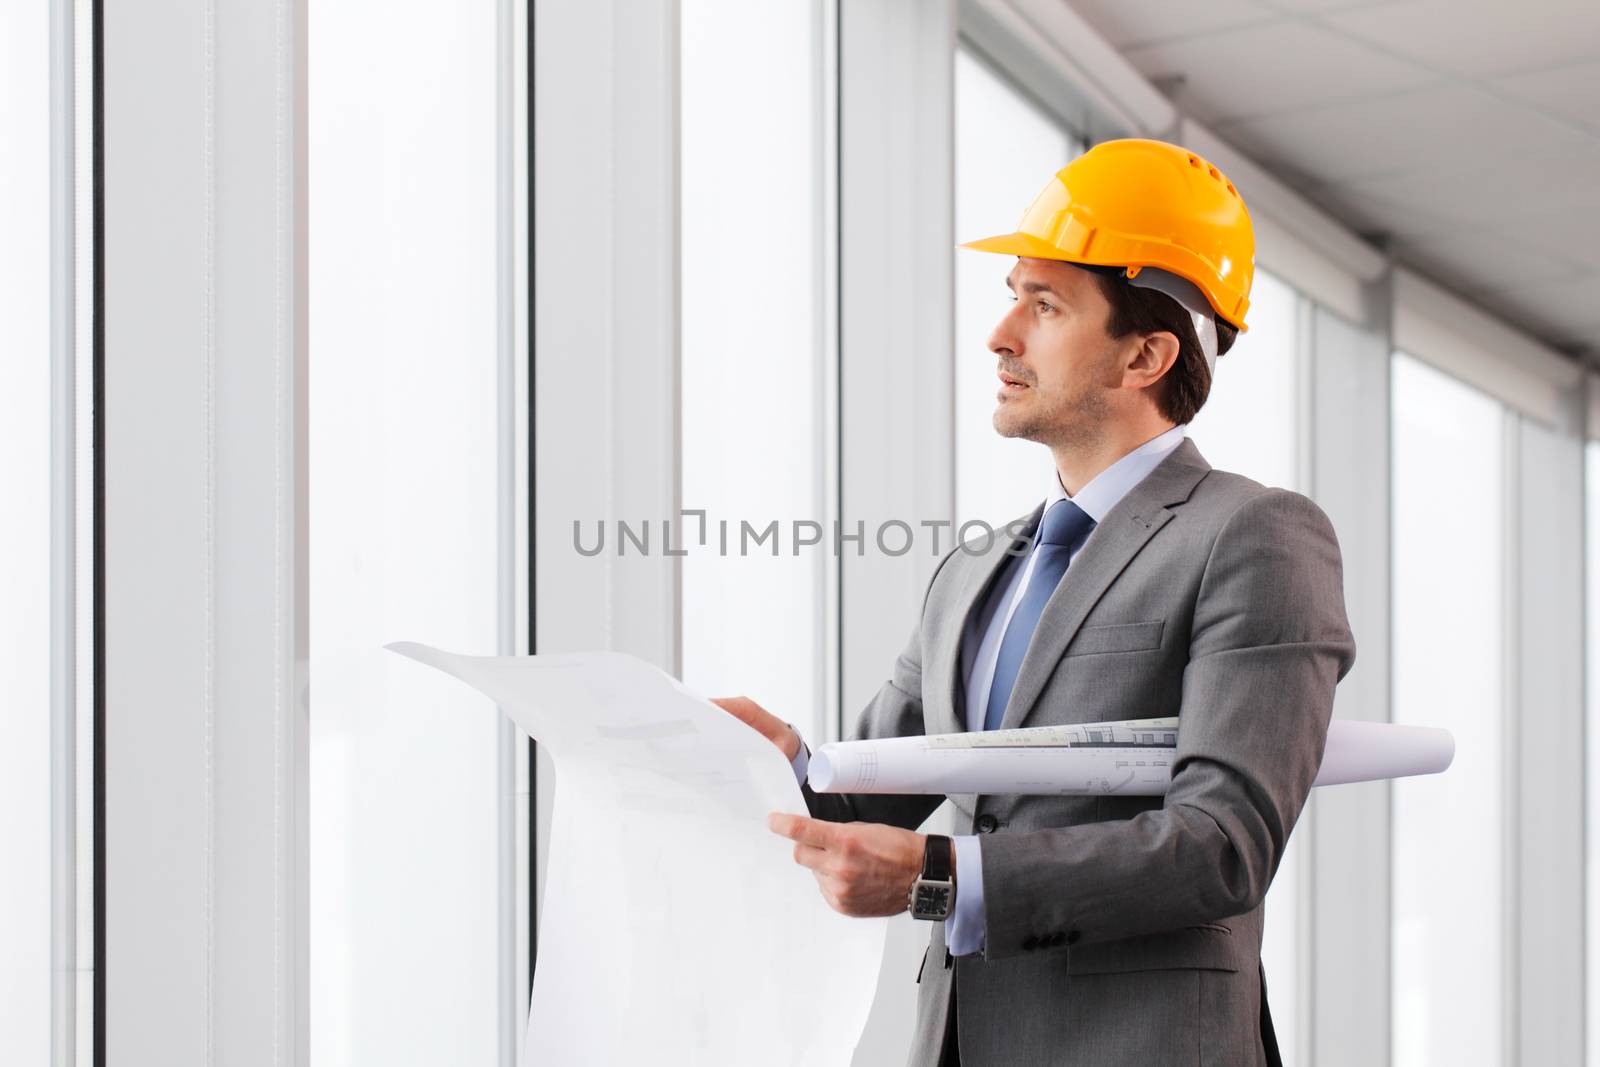 Architector in hardhat by ALotOfPeople